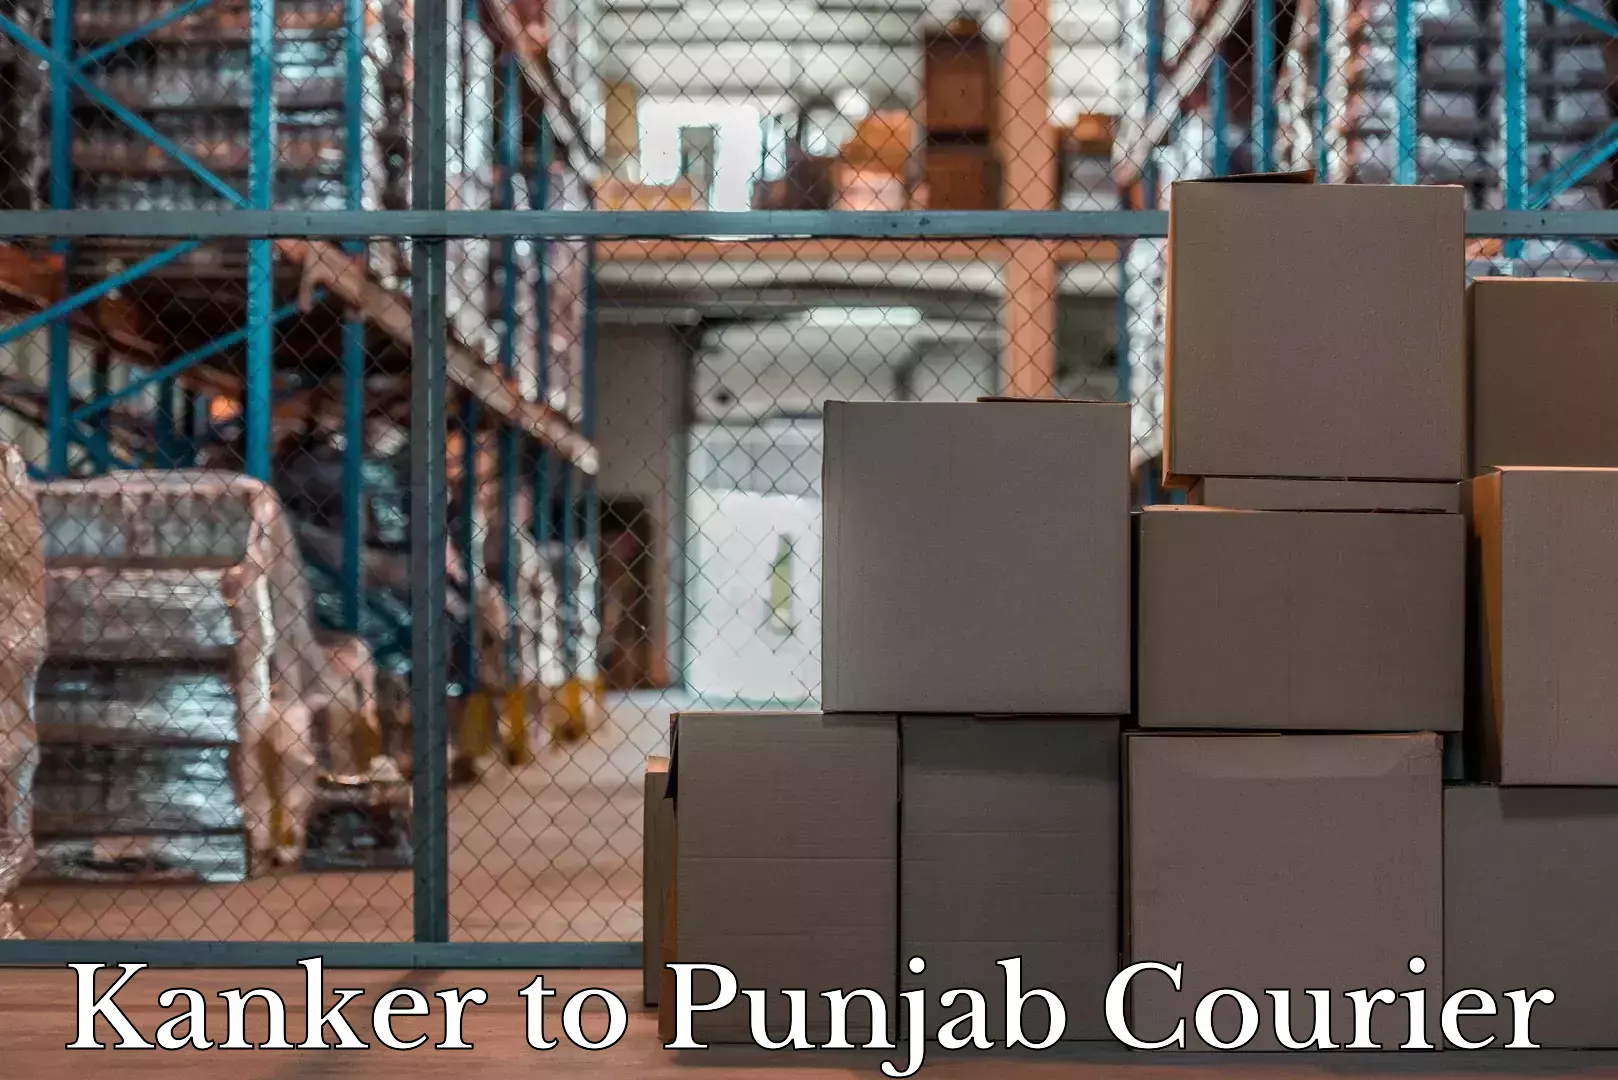 Luggage shipment specialists Kanker to Punjab